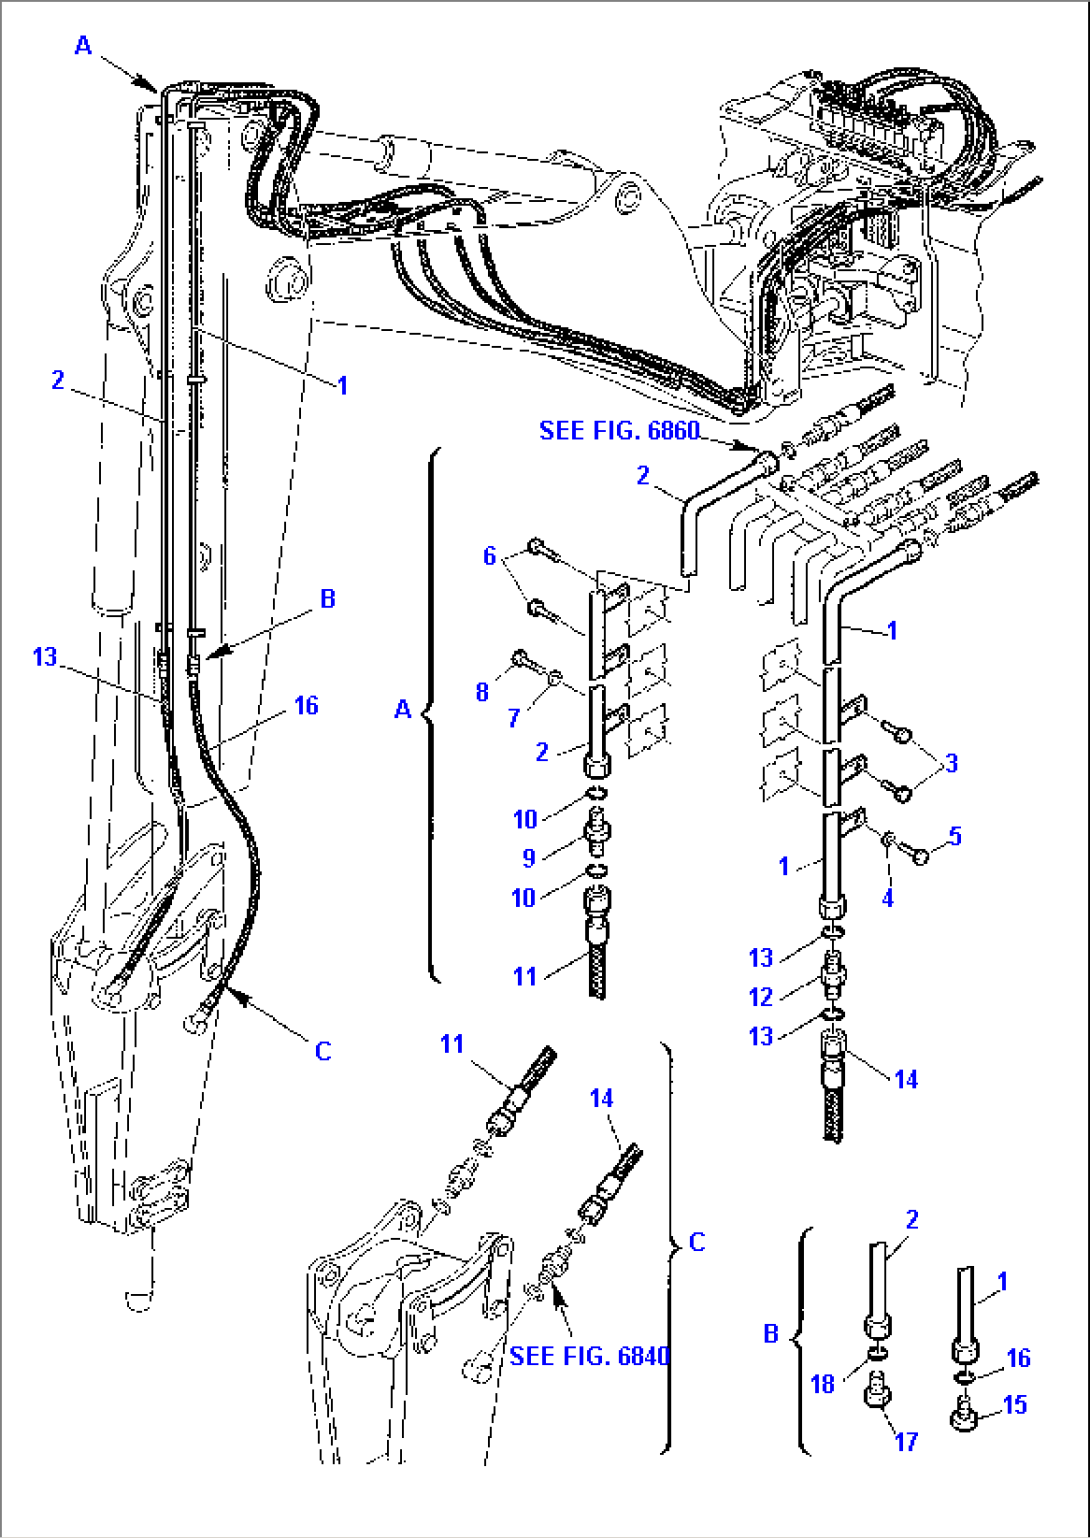 HAMMER HYDRAULIC PIPING WITH JIG ARM (2/2)